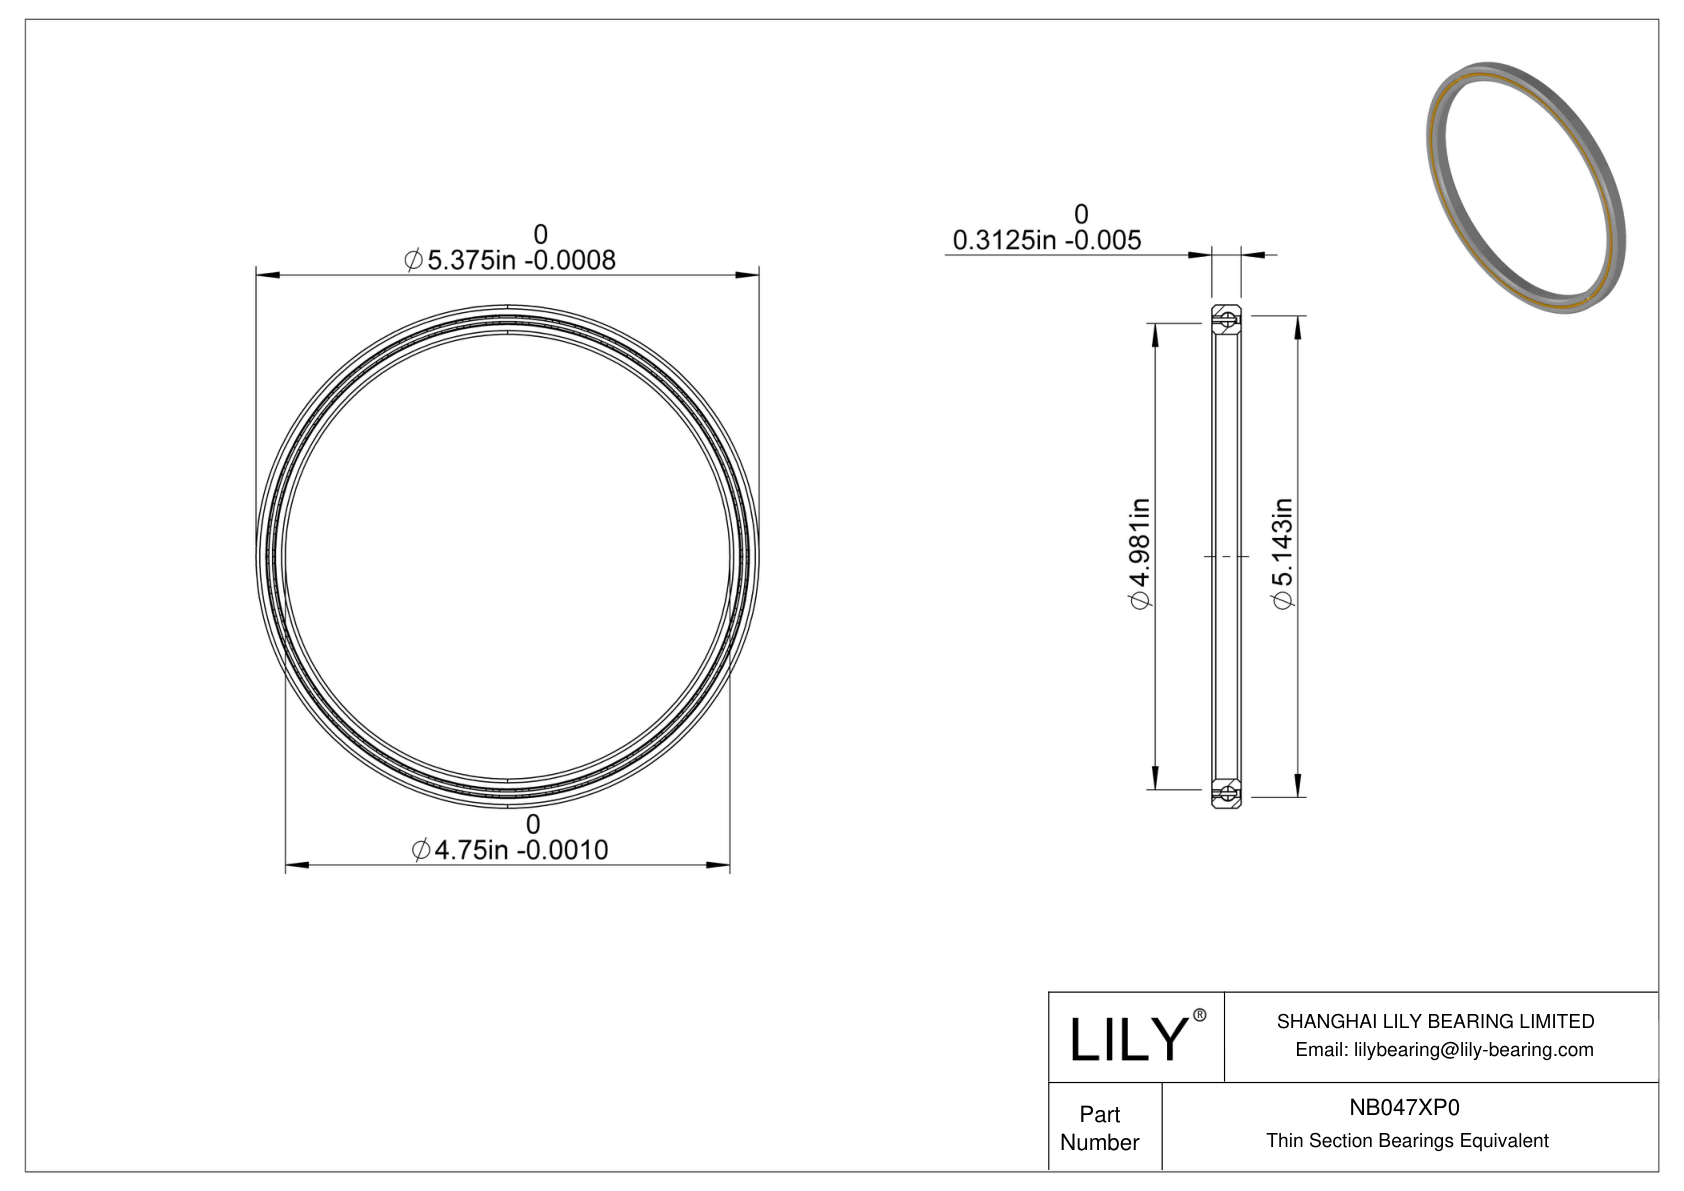 NB047XP0 Constant Section (CS) Bearings cad drawing